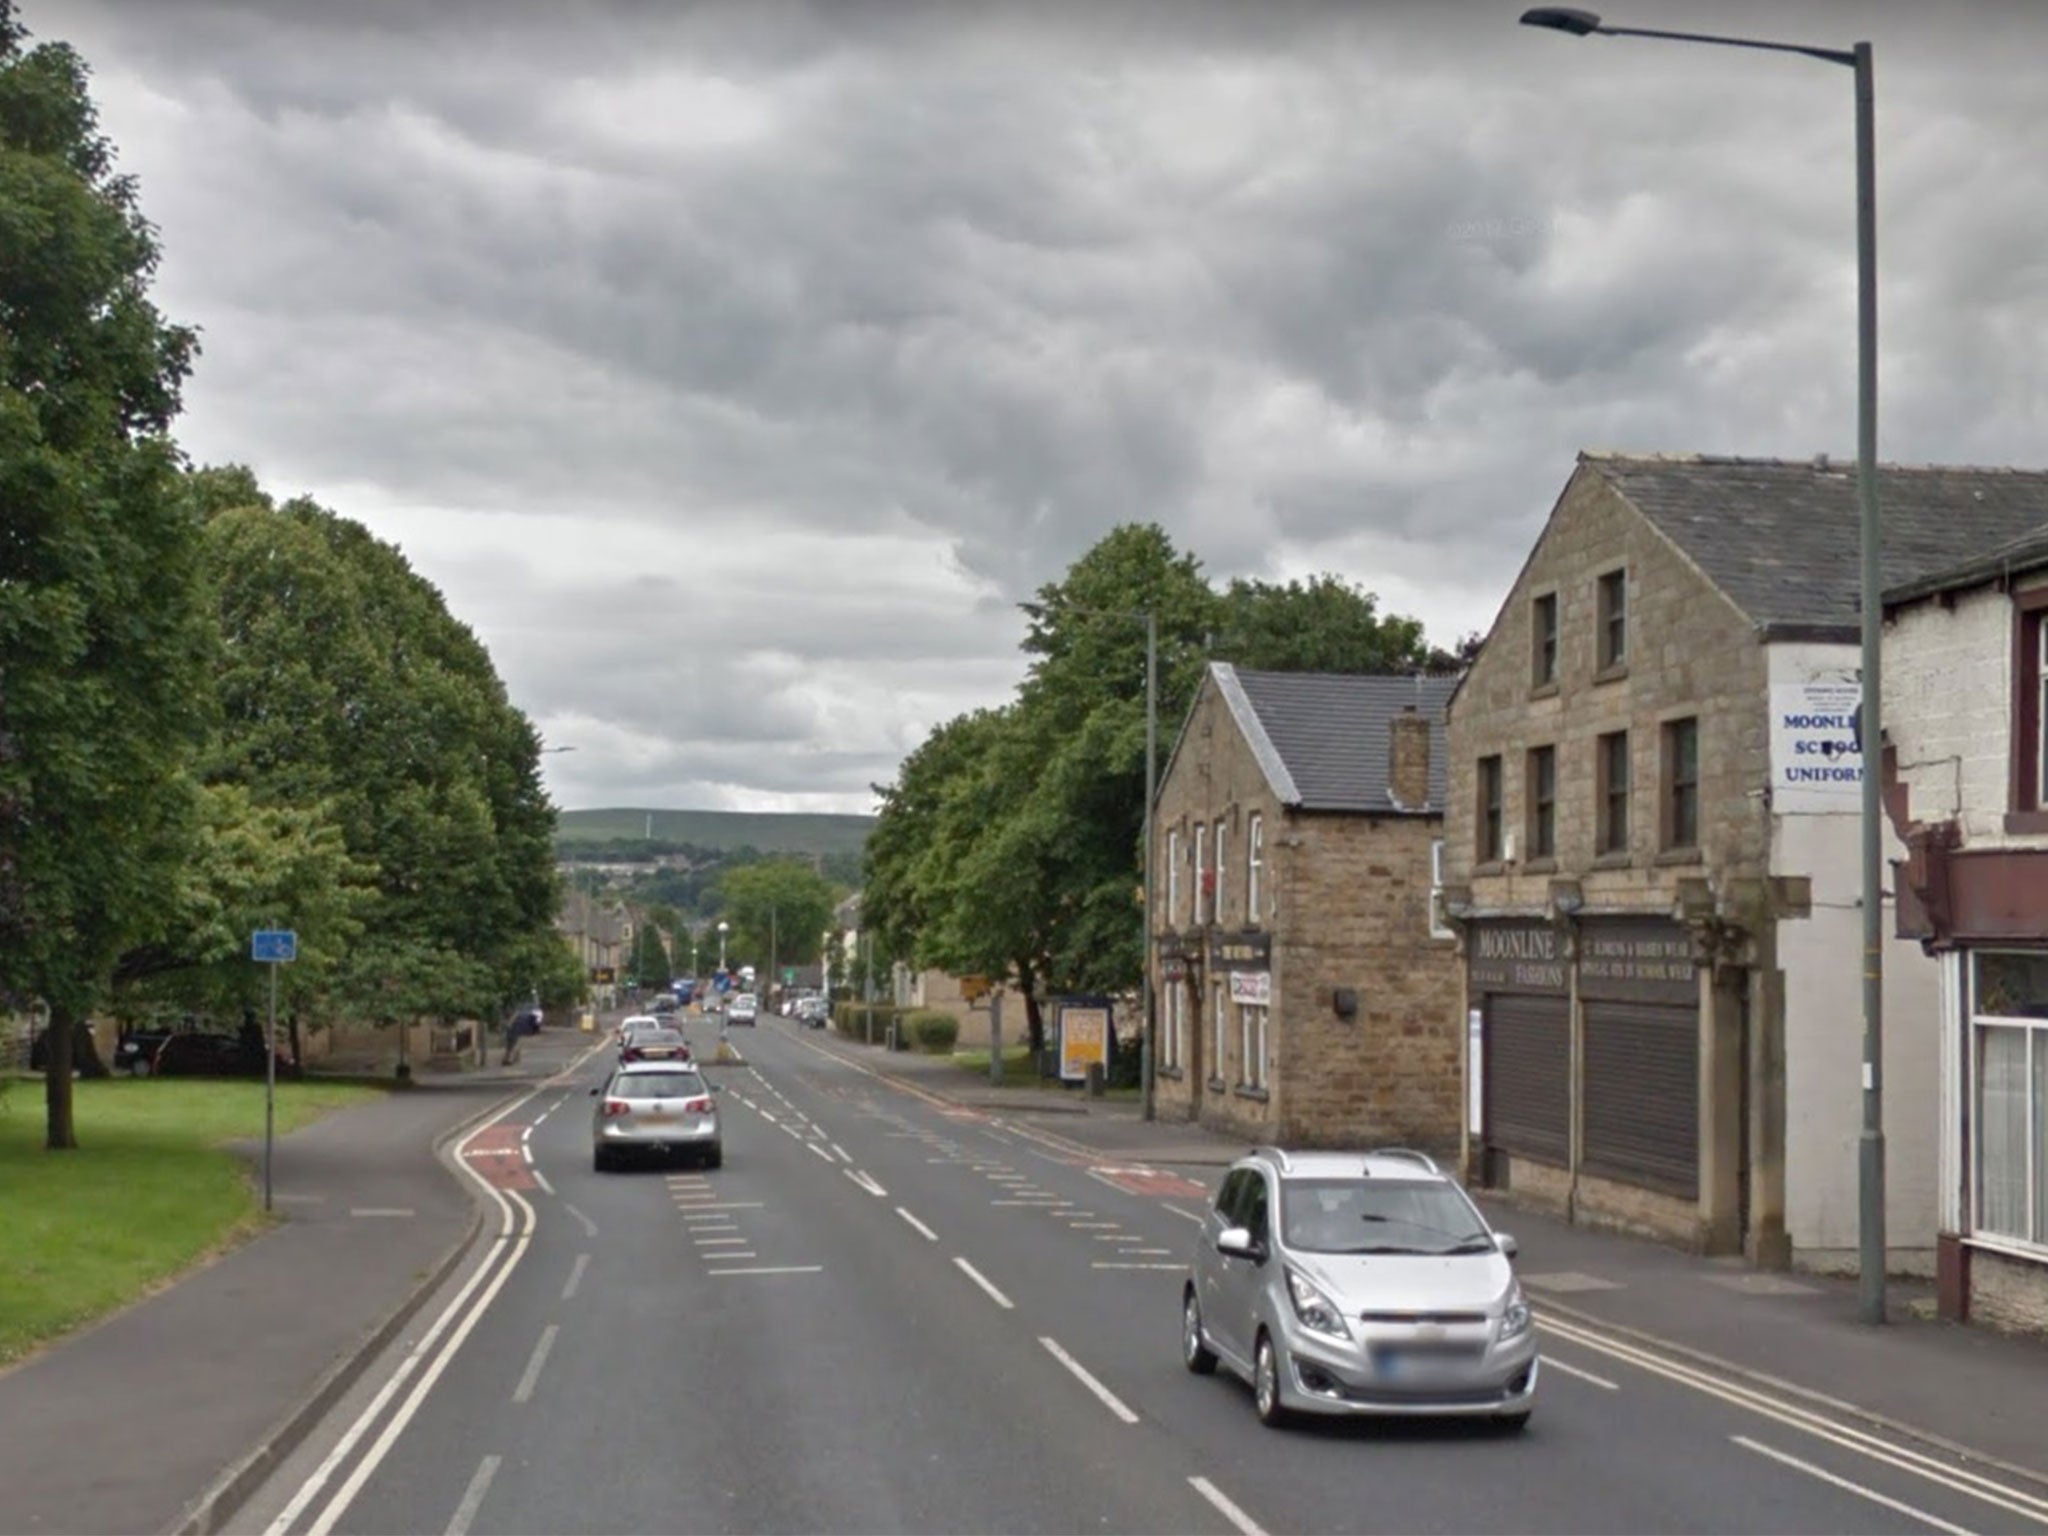 Police had been pursuing the vehicle in Colne Road in Burnley at the time of the crash